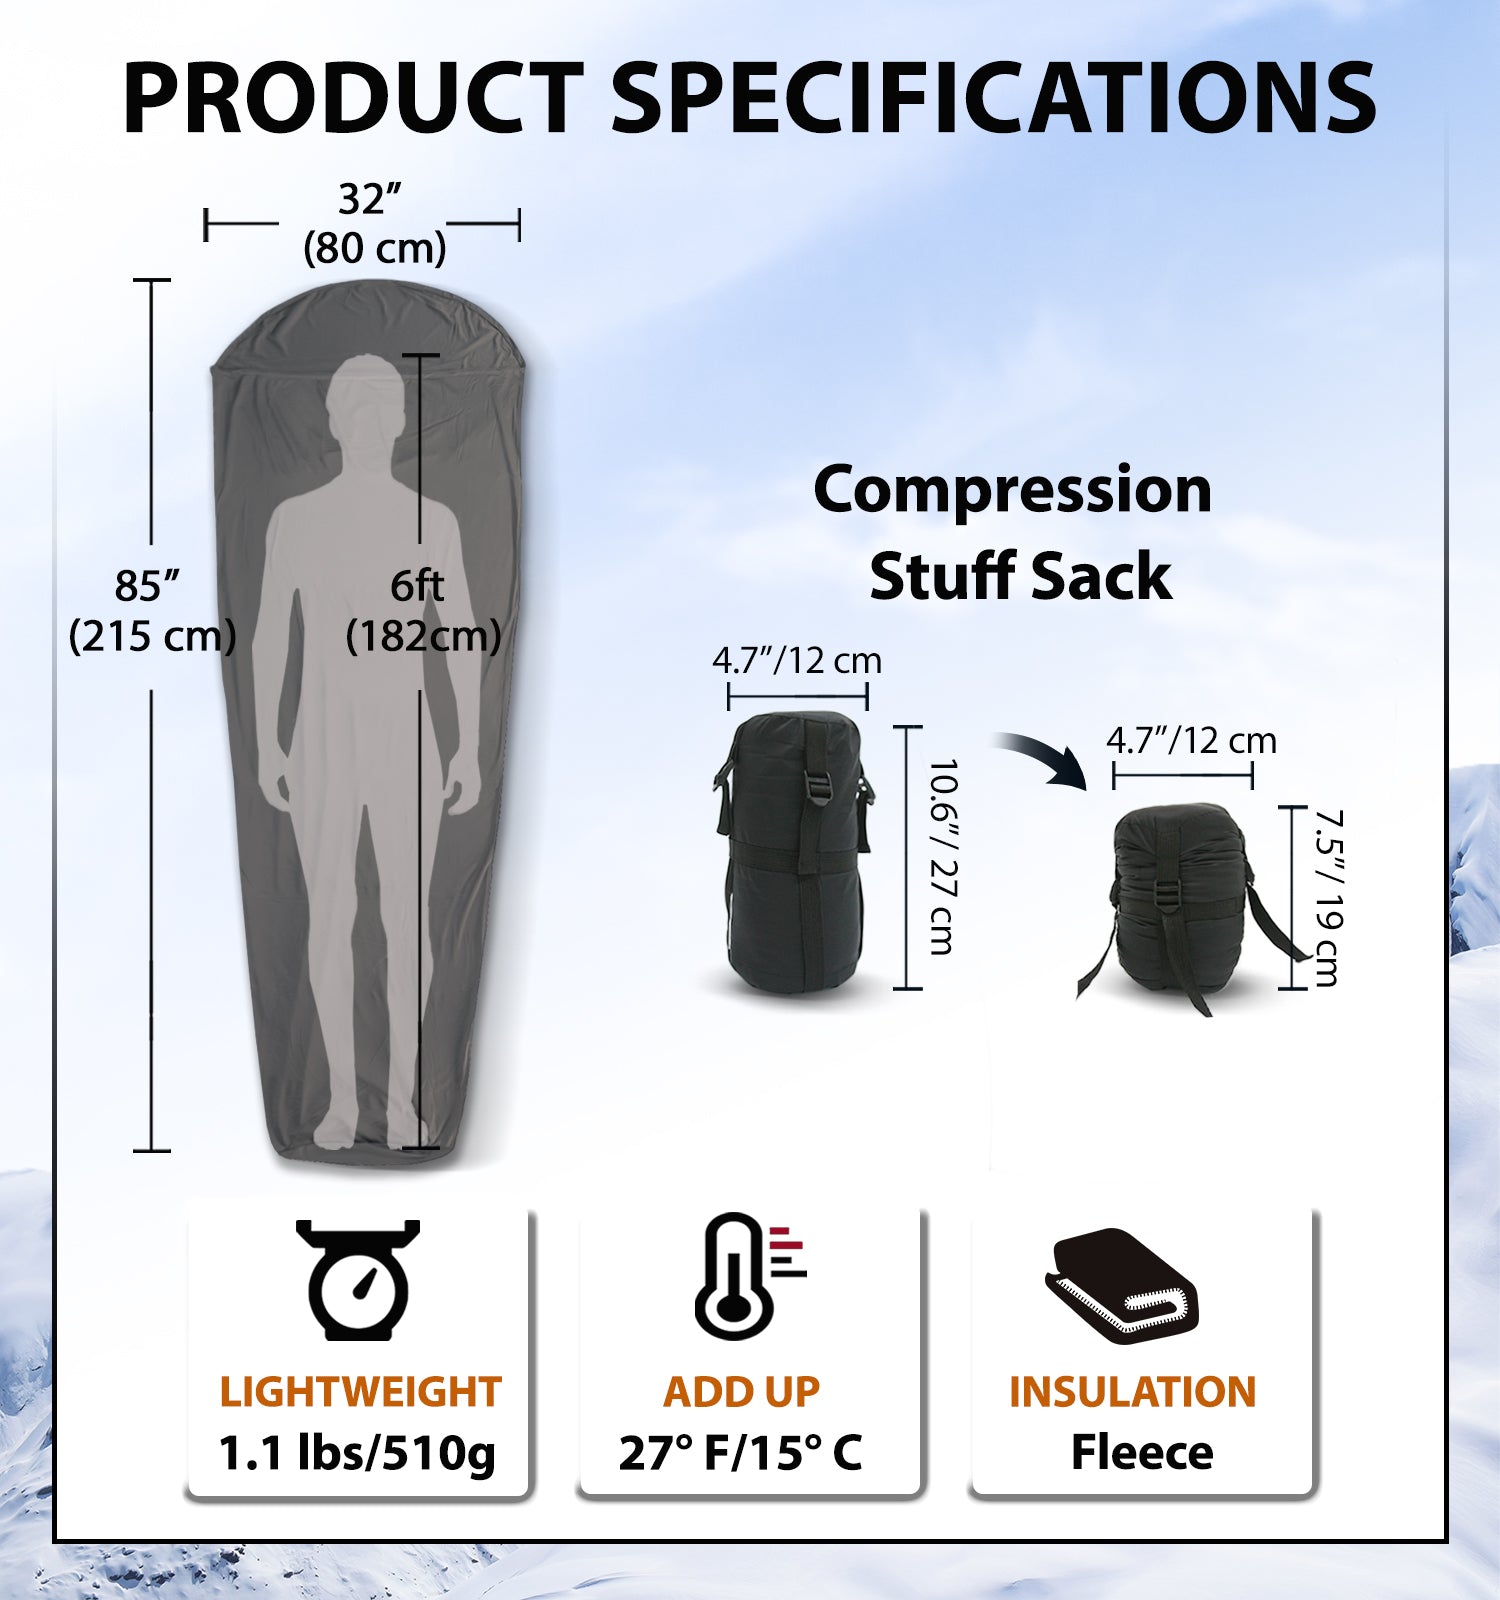 How to stuff a sleeping bag back in its sack – Scout Life magazine